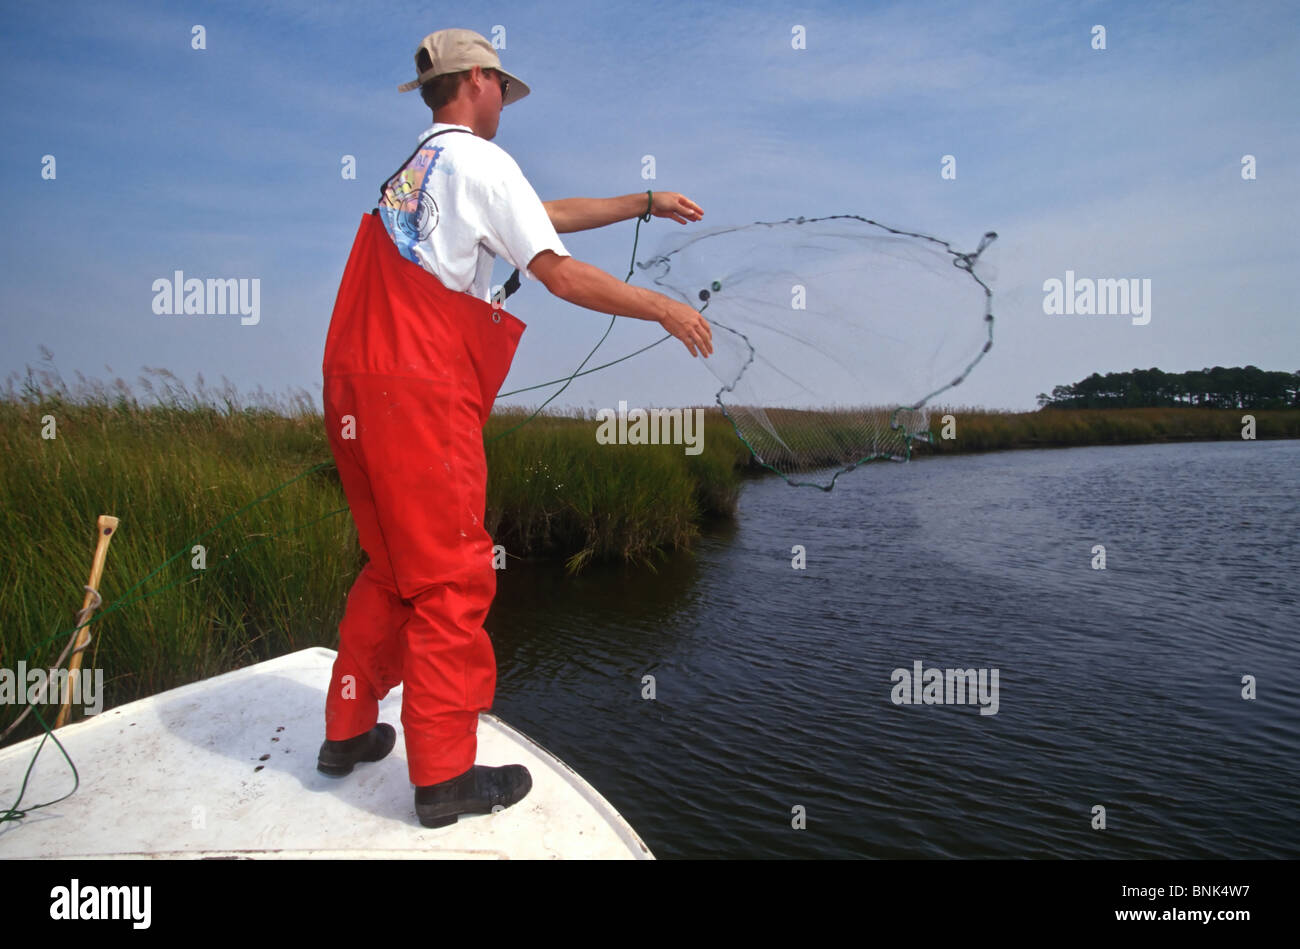 SHELLTOWN, MD, USA - 1997/09/25: A researcher for the Maryland Department of Natural Resources casts a net to look for signs of the flesh eating Pfiesteria disease on fish stocks in the Pocomoke River along the Chesapeake Bay September 25, 1997 in Shelltown, Maryland. The outbreak caused a loss of $43 million dollars in fishing revenue and is believed to be caused by the runoff of chicken manure from farms in the area. (Photo by Richard Ellis) Stock Photo